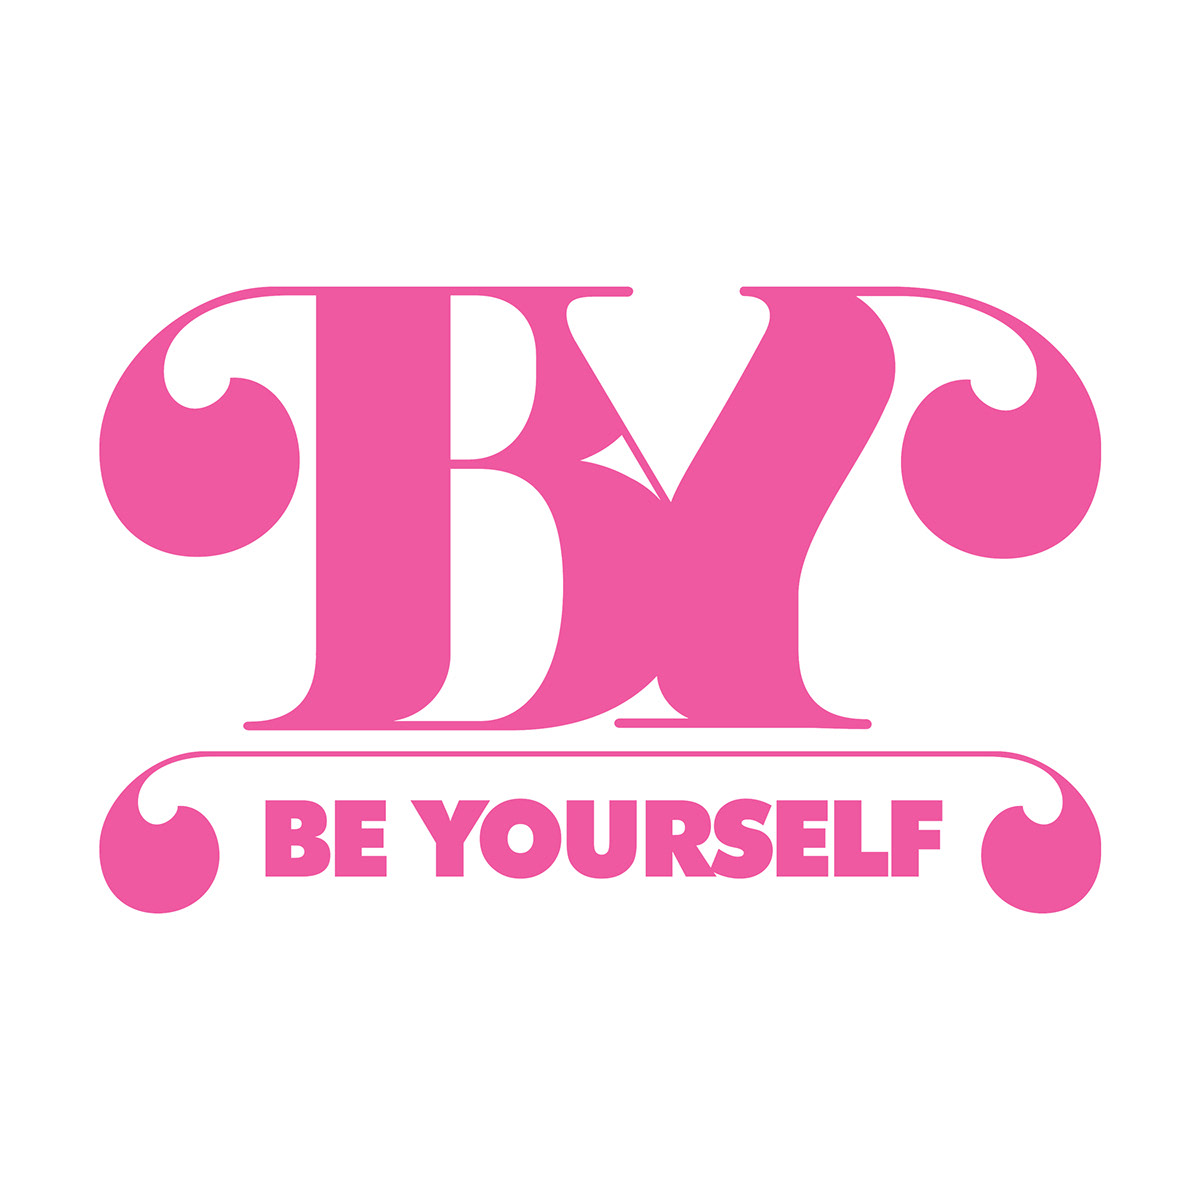 be yourself by shop IB Hoang Phuong